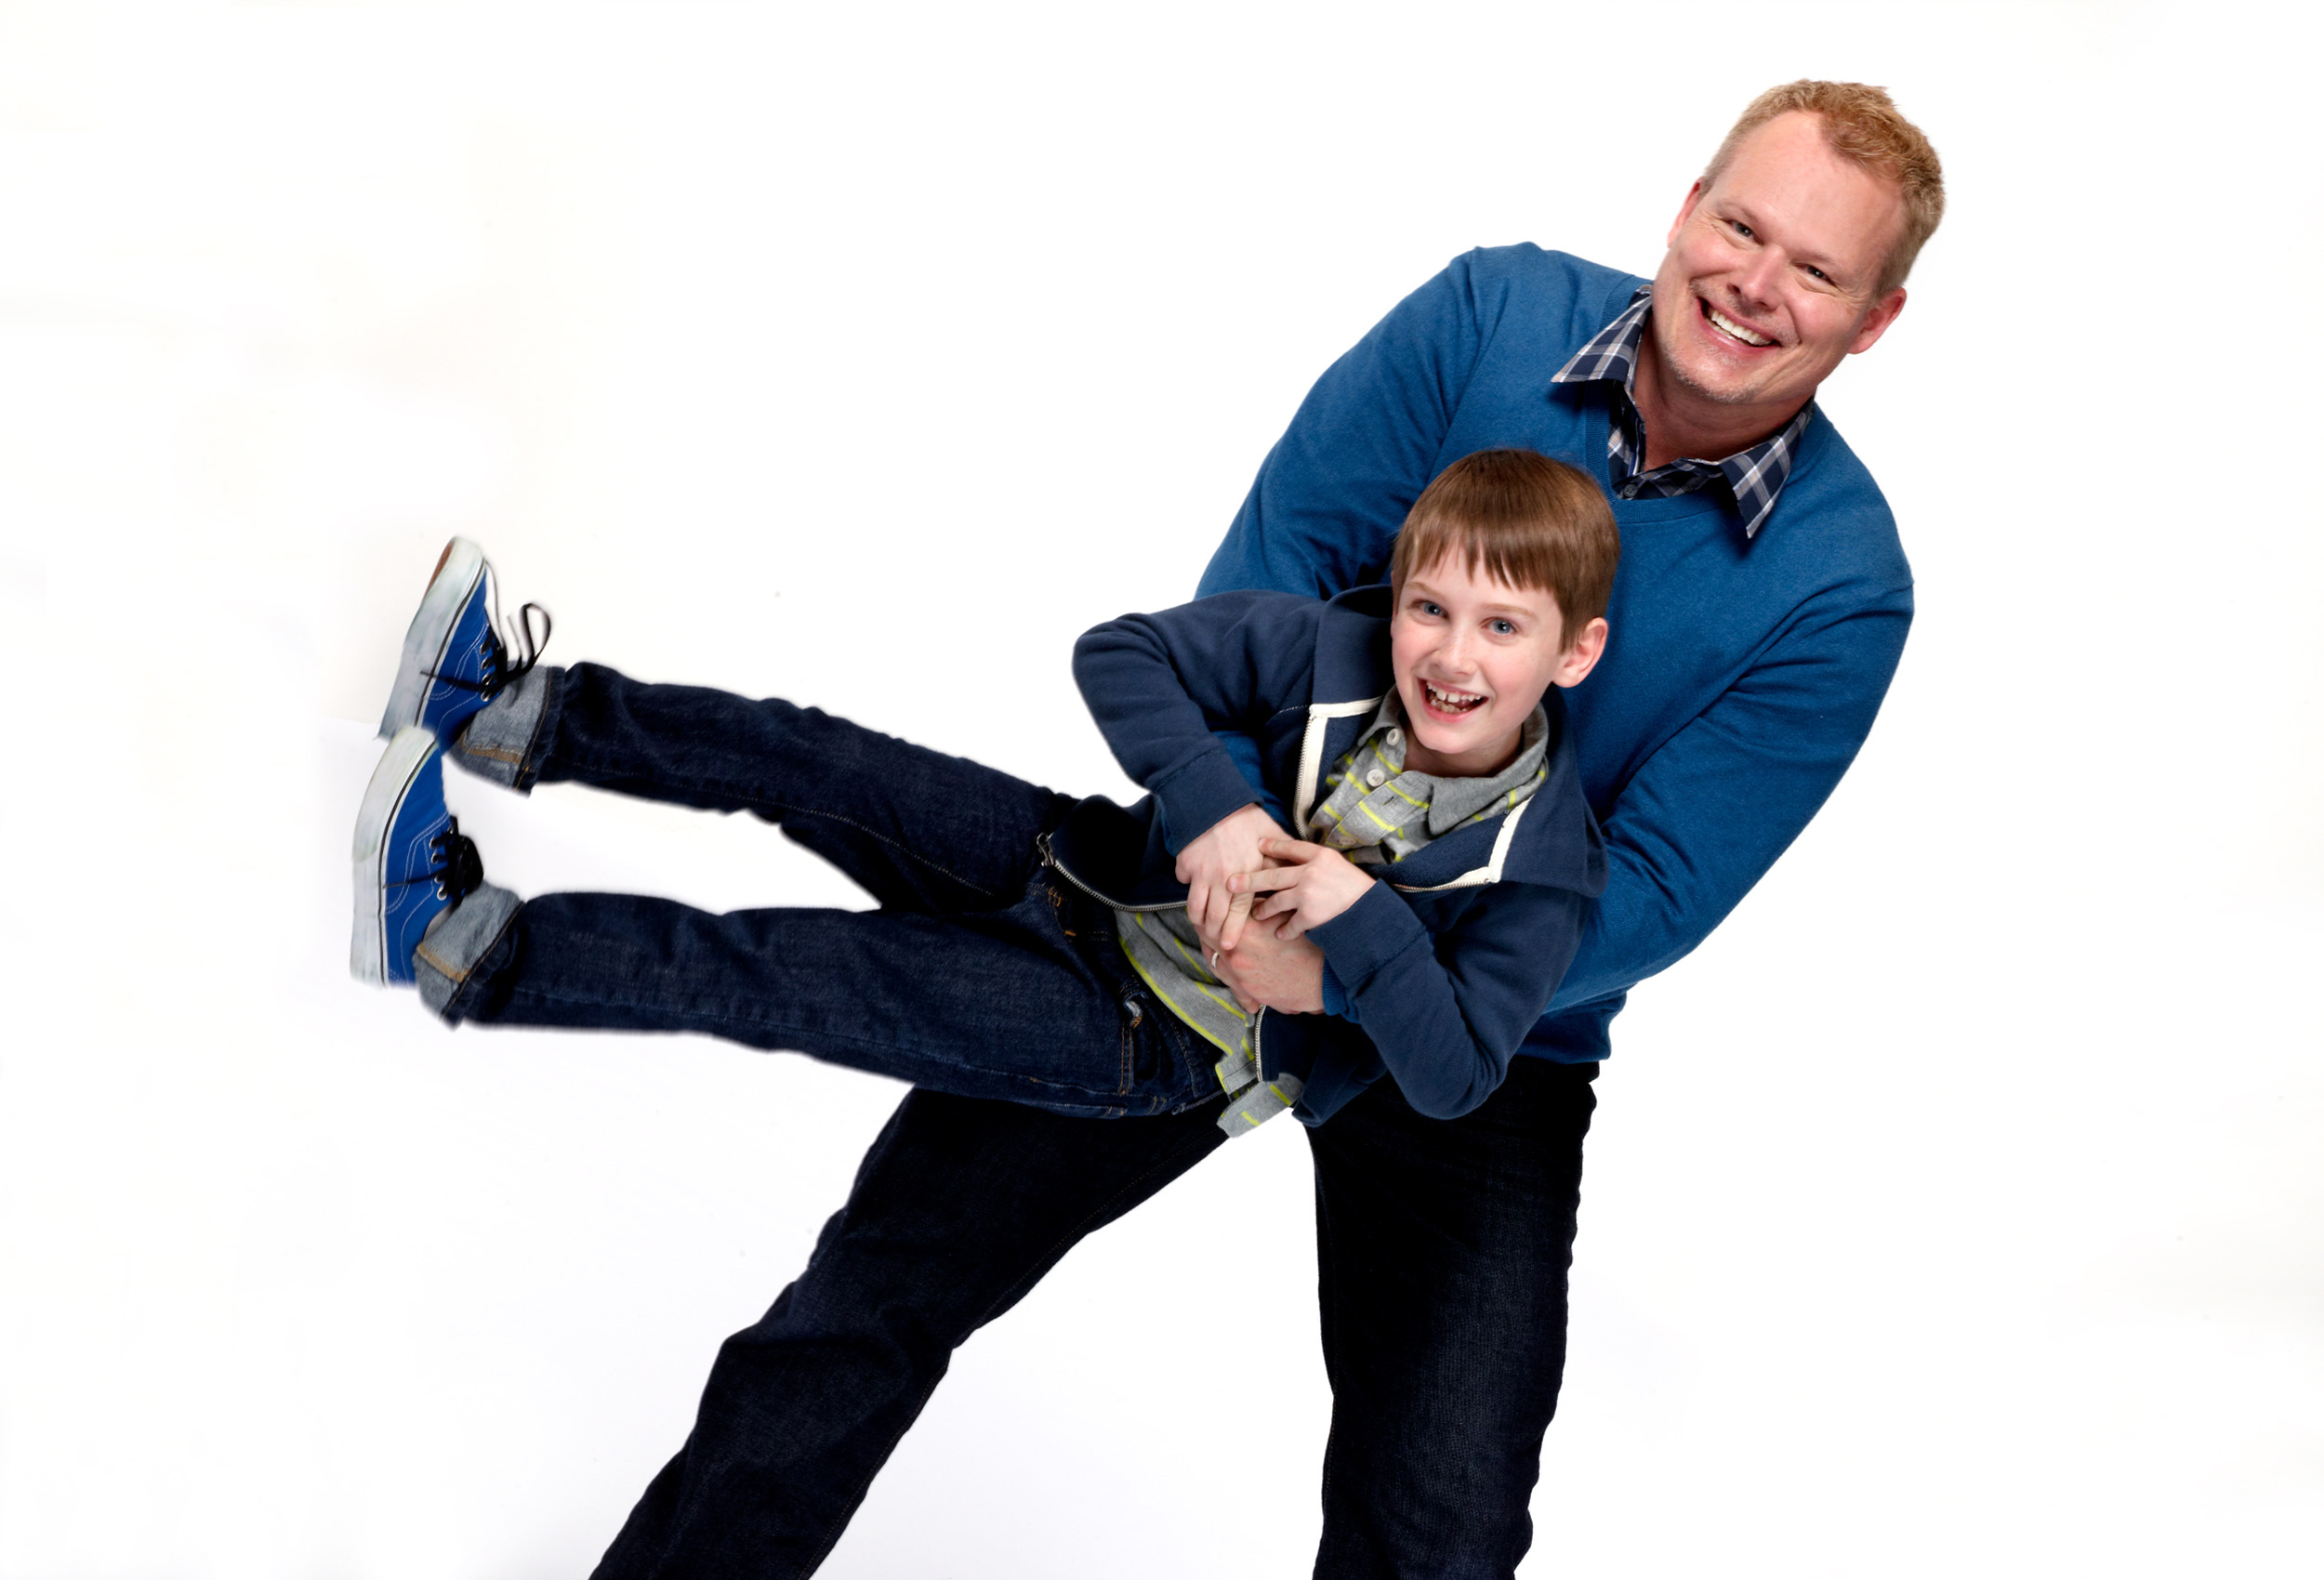 Father and son play on white background for Dr. Scholl